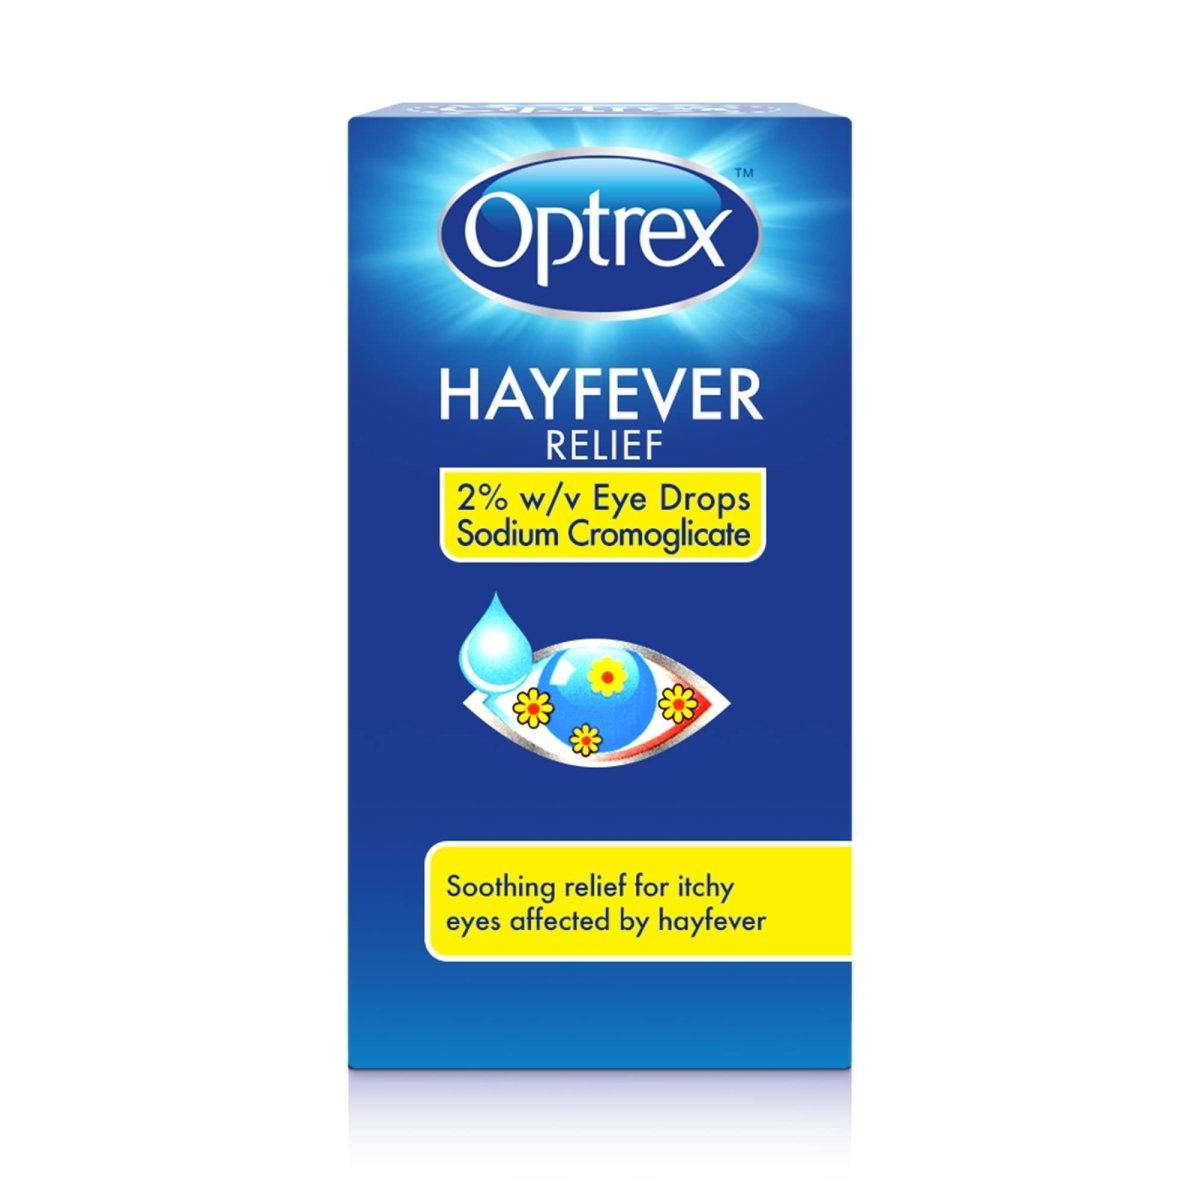 Optrex Hay Fever Relief - Rightangled